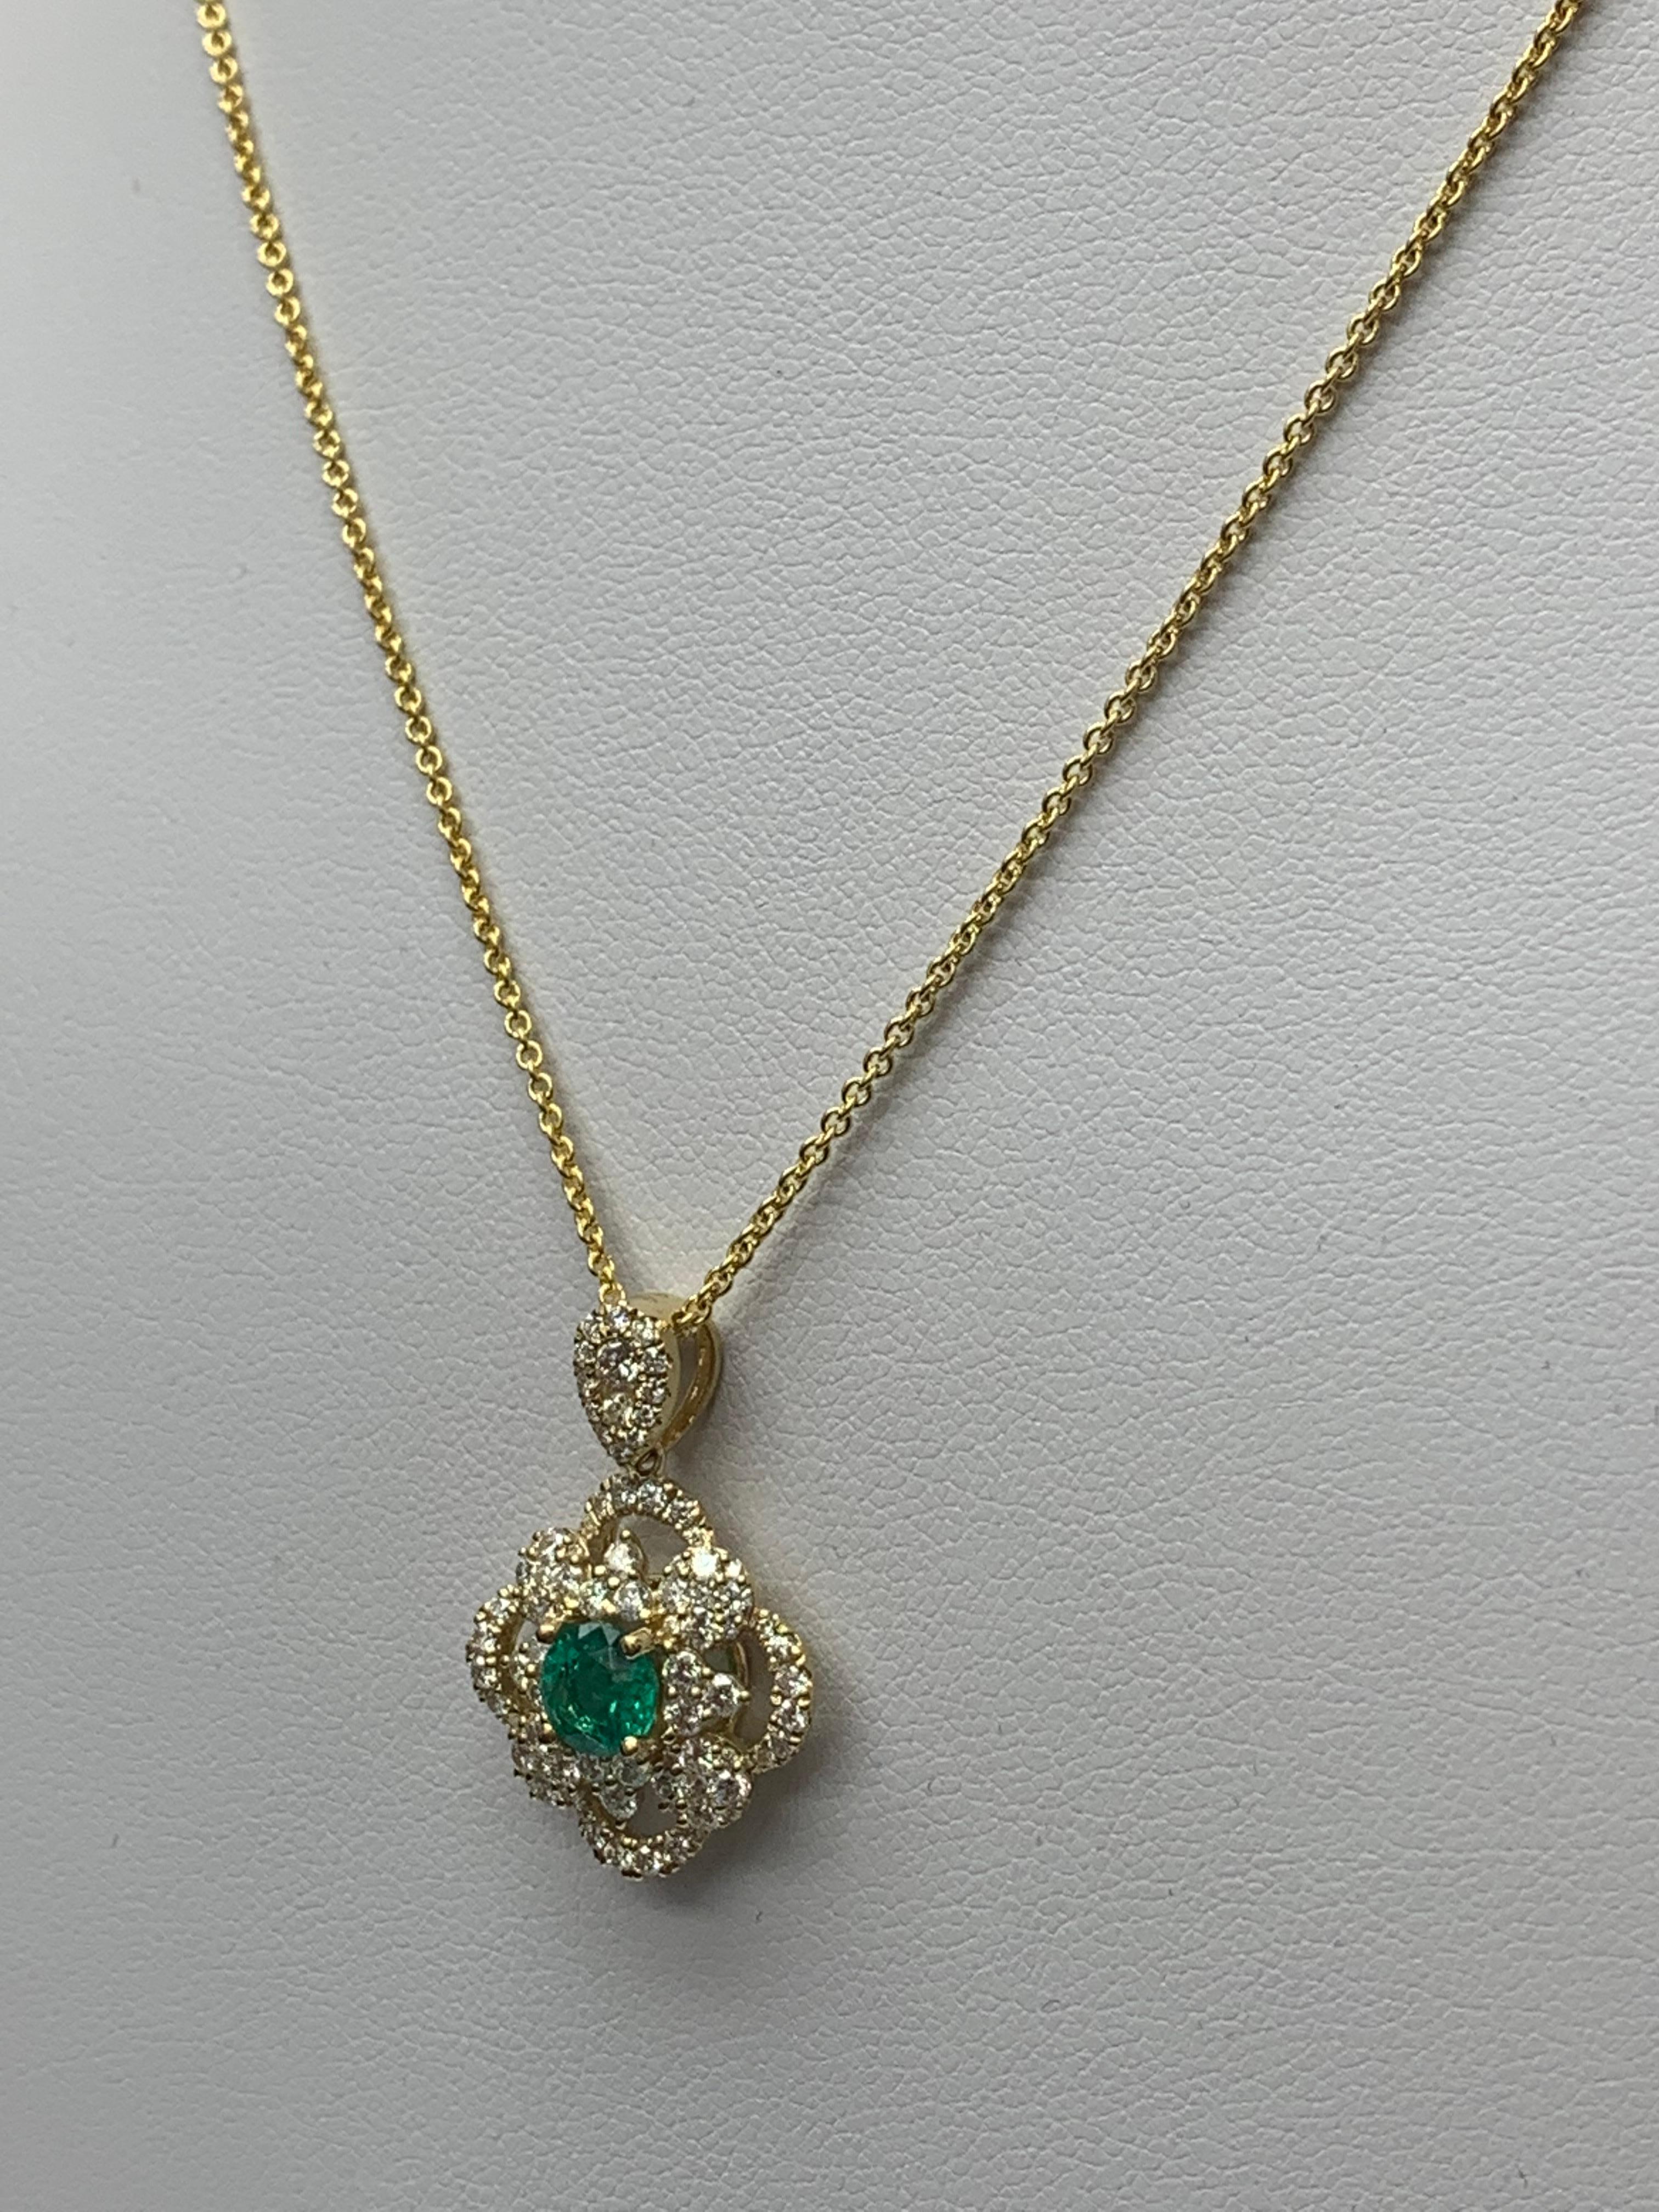 0.67 Carat Round Cut Emerald and Diamond Pendant Necklace in 18K Yellow Gold For Sale 4